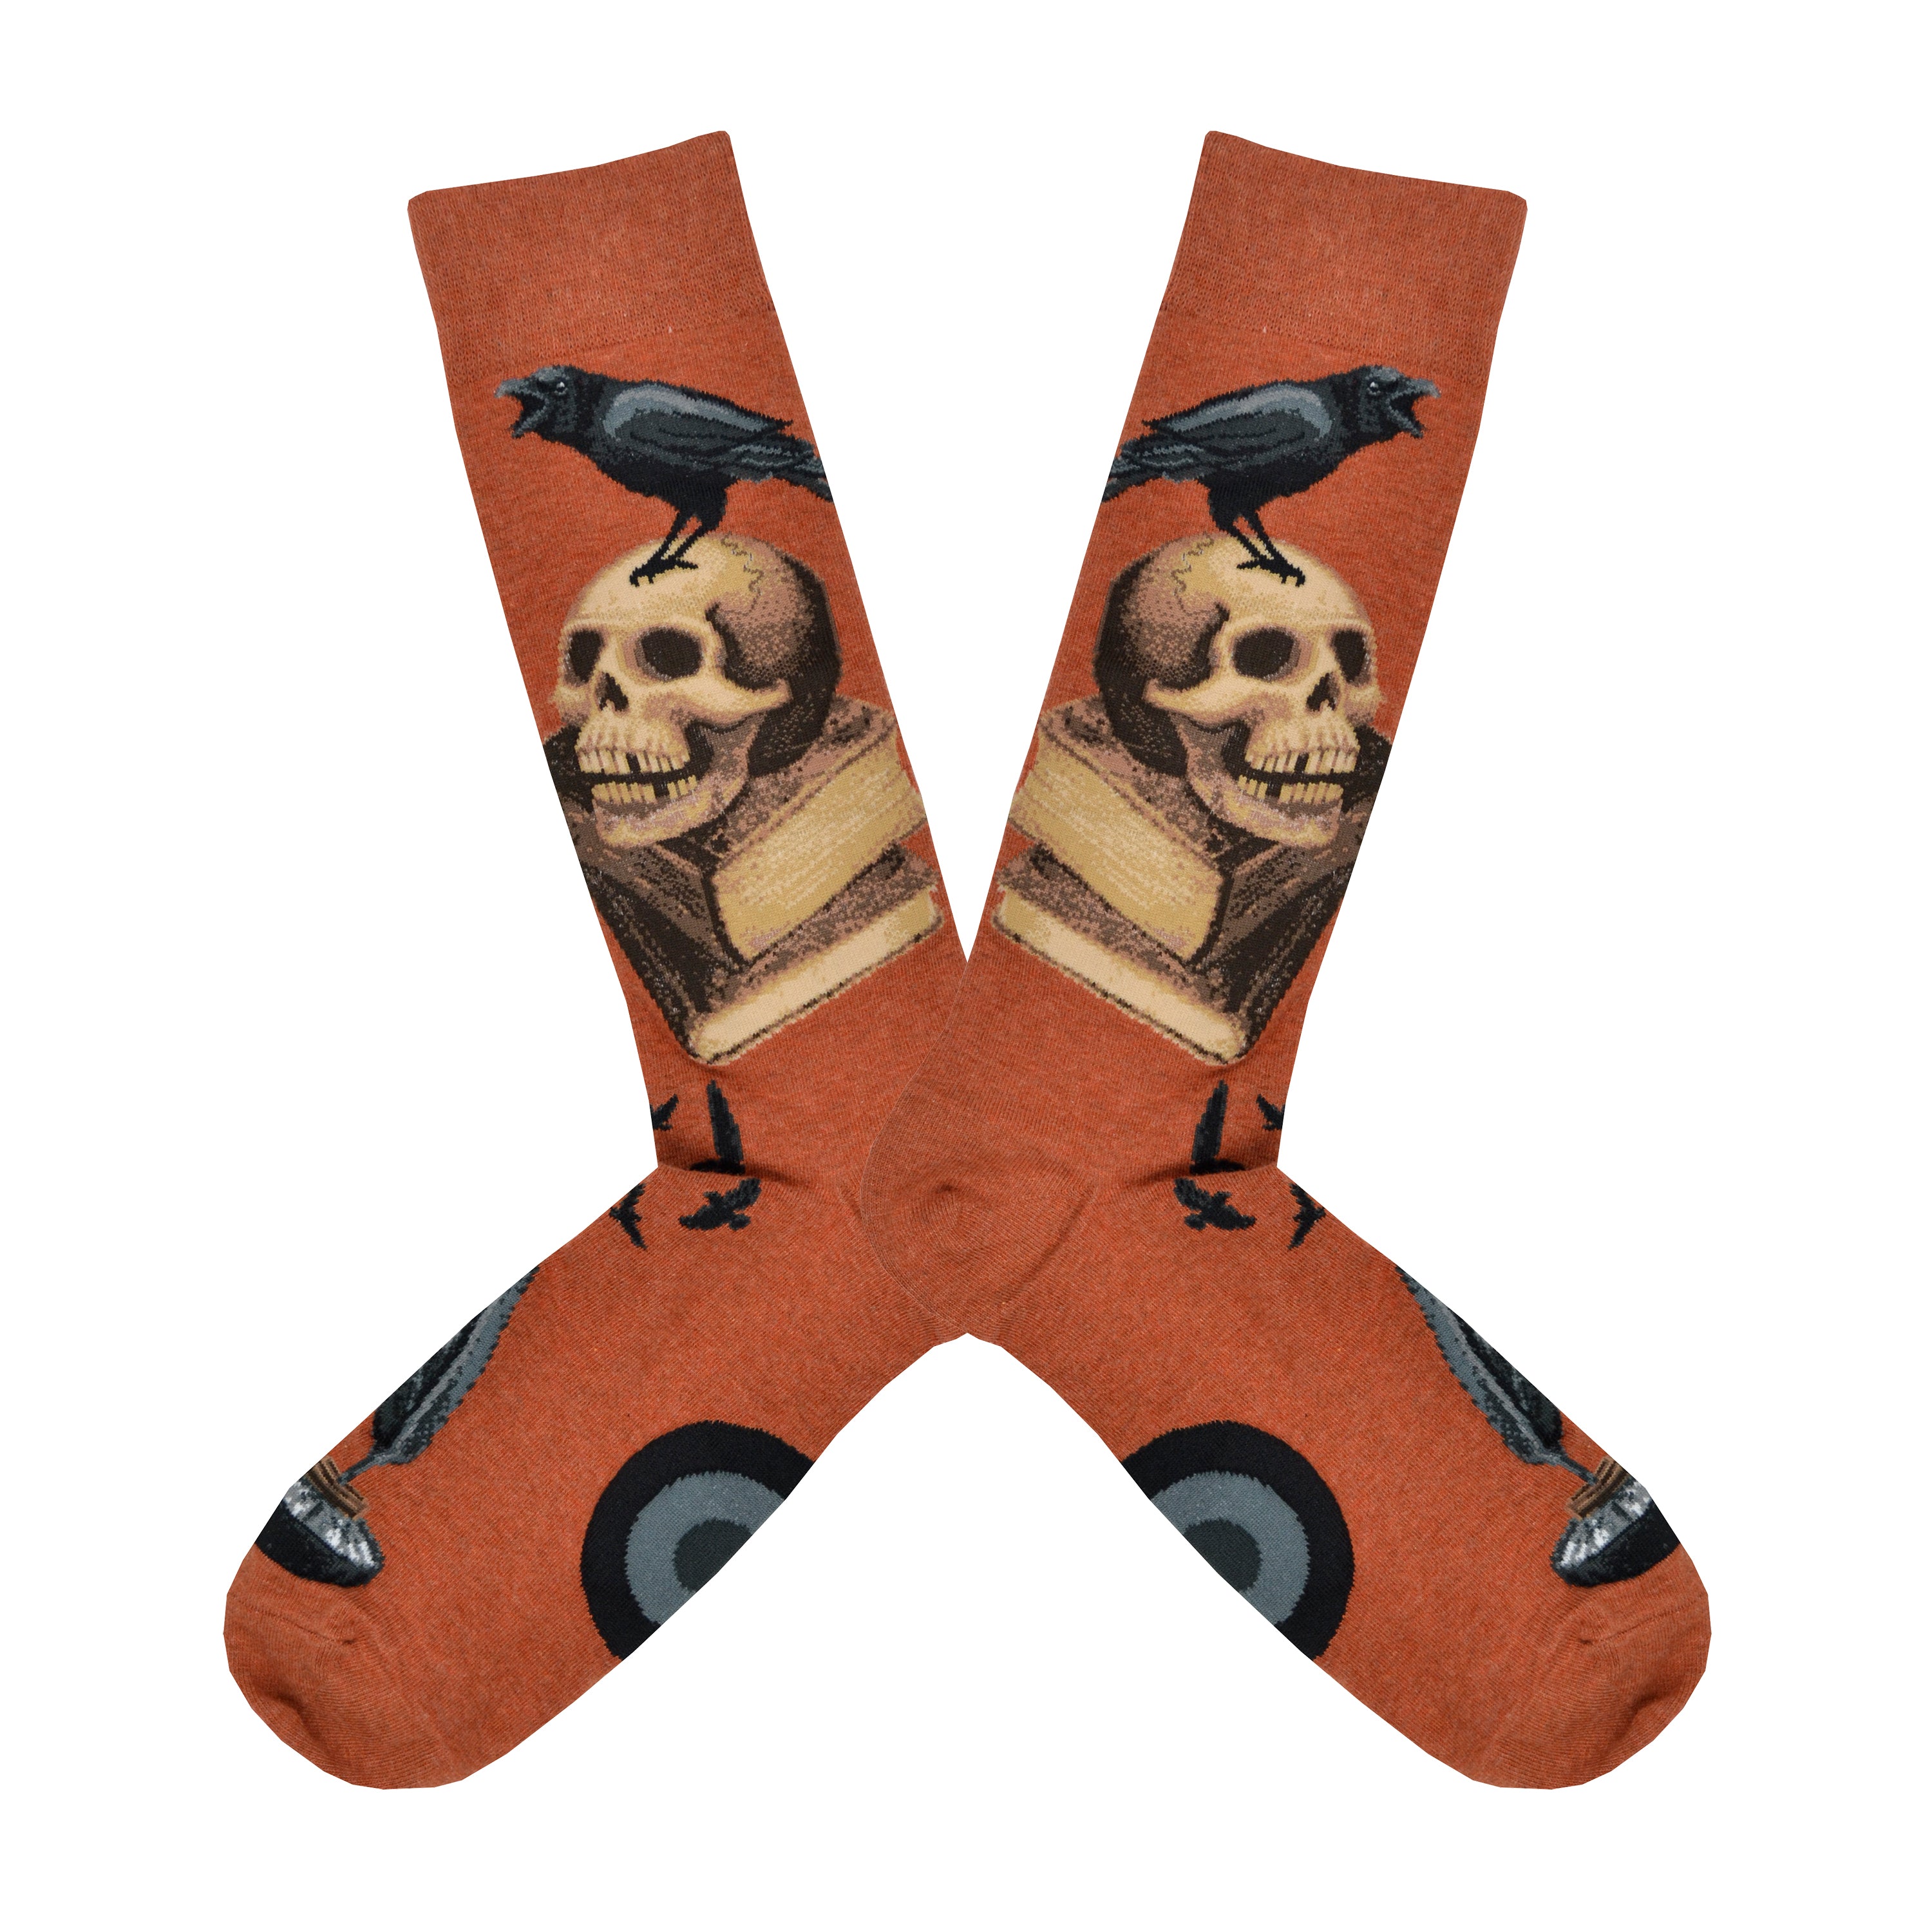 Shown in a flatlay, a pair of Mod Socks’ warm brown cotton men's crew socks with a stack of books, skull, and raven